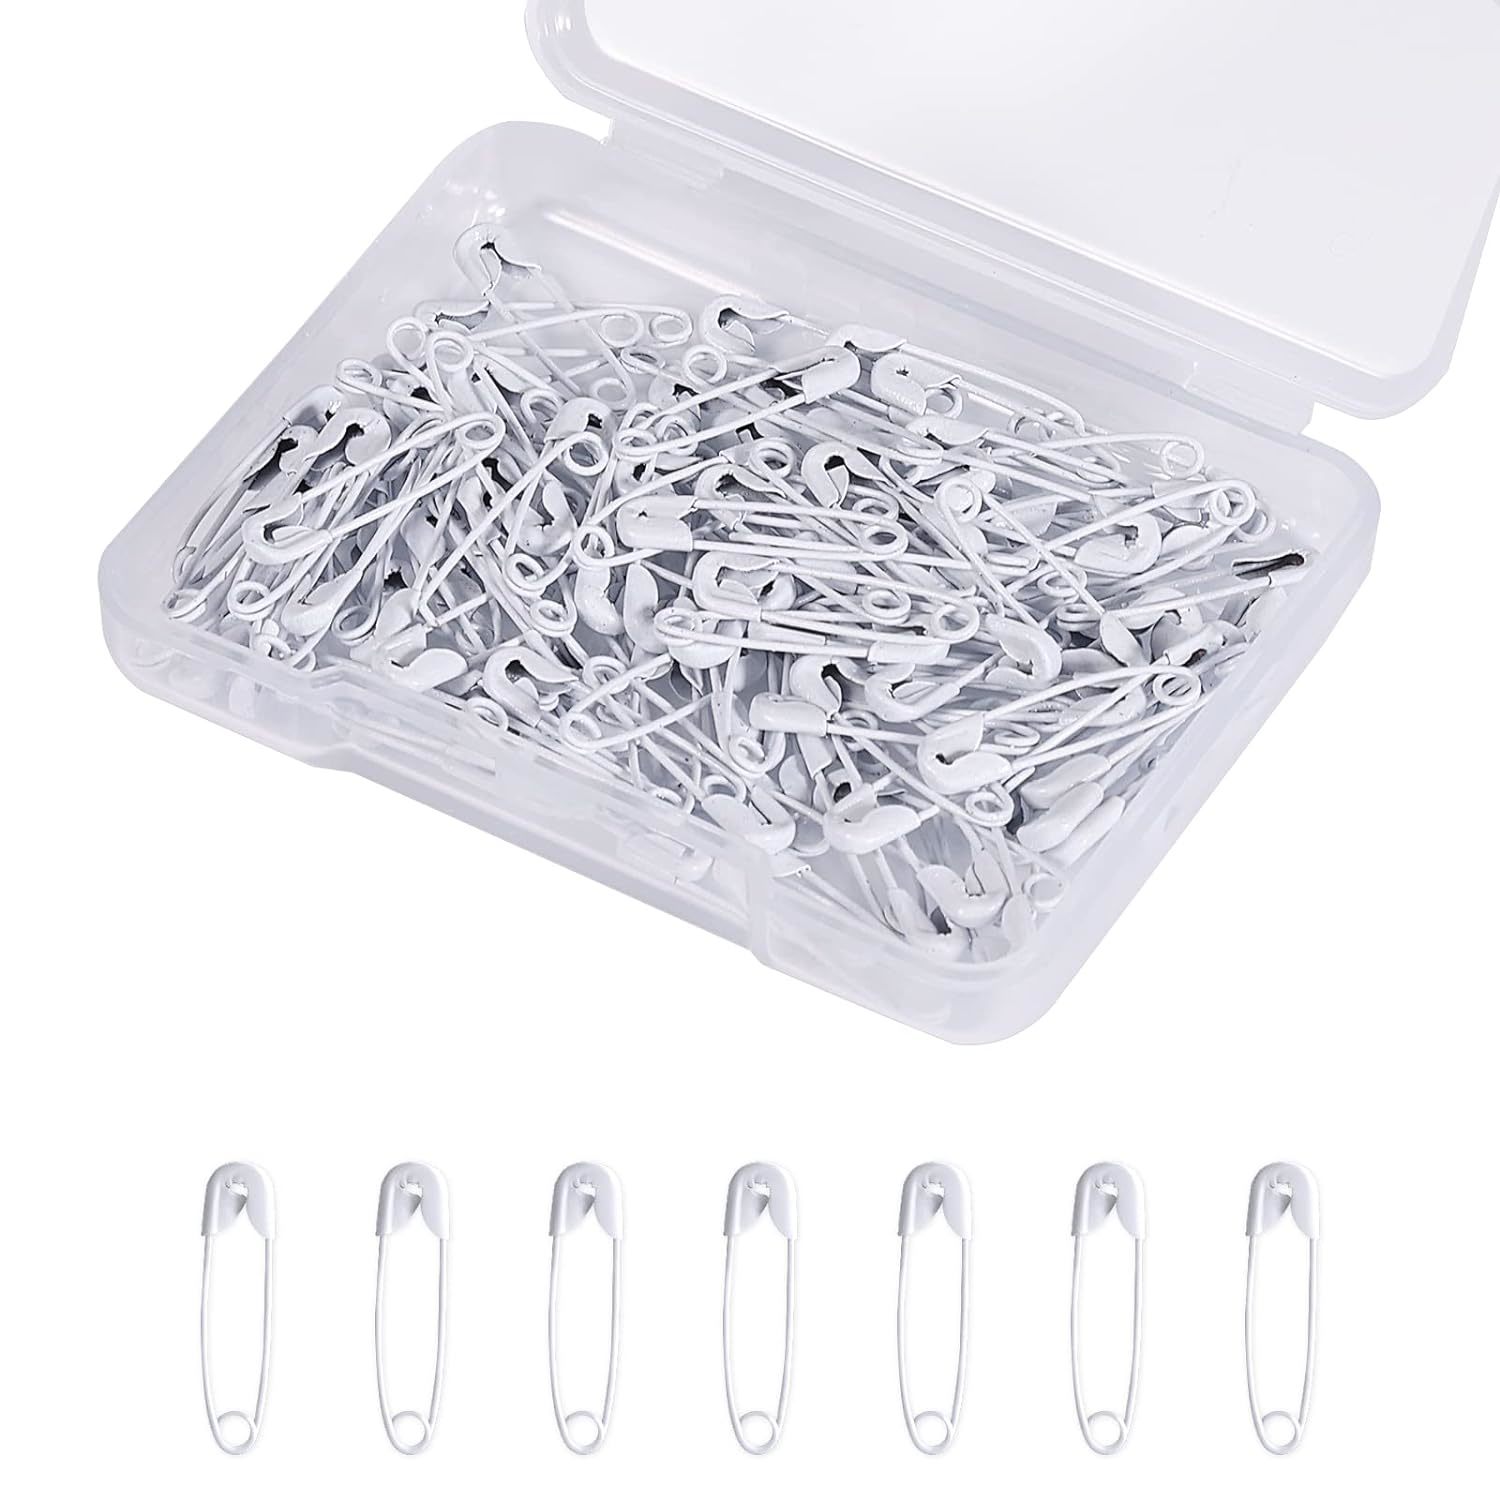 30PCS 5Cm/2Inch Brooches Heavy Duty Safety Pins for Blankets